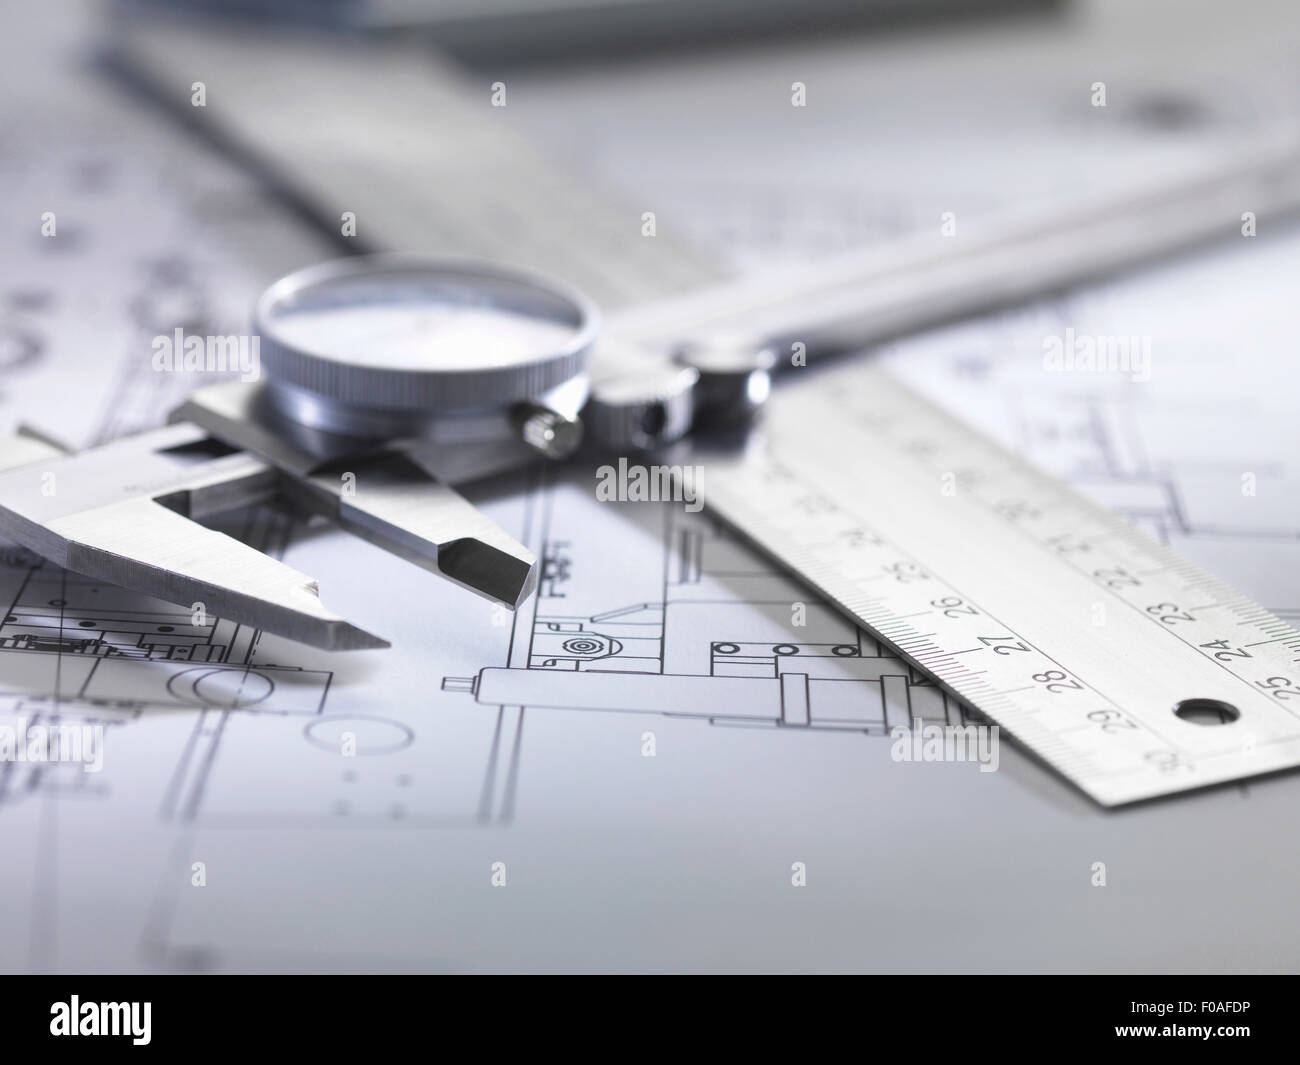 Engineering measurement and drawing equipment on design drawing Stock Photo